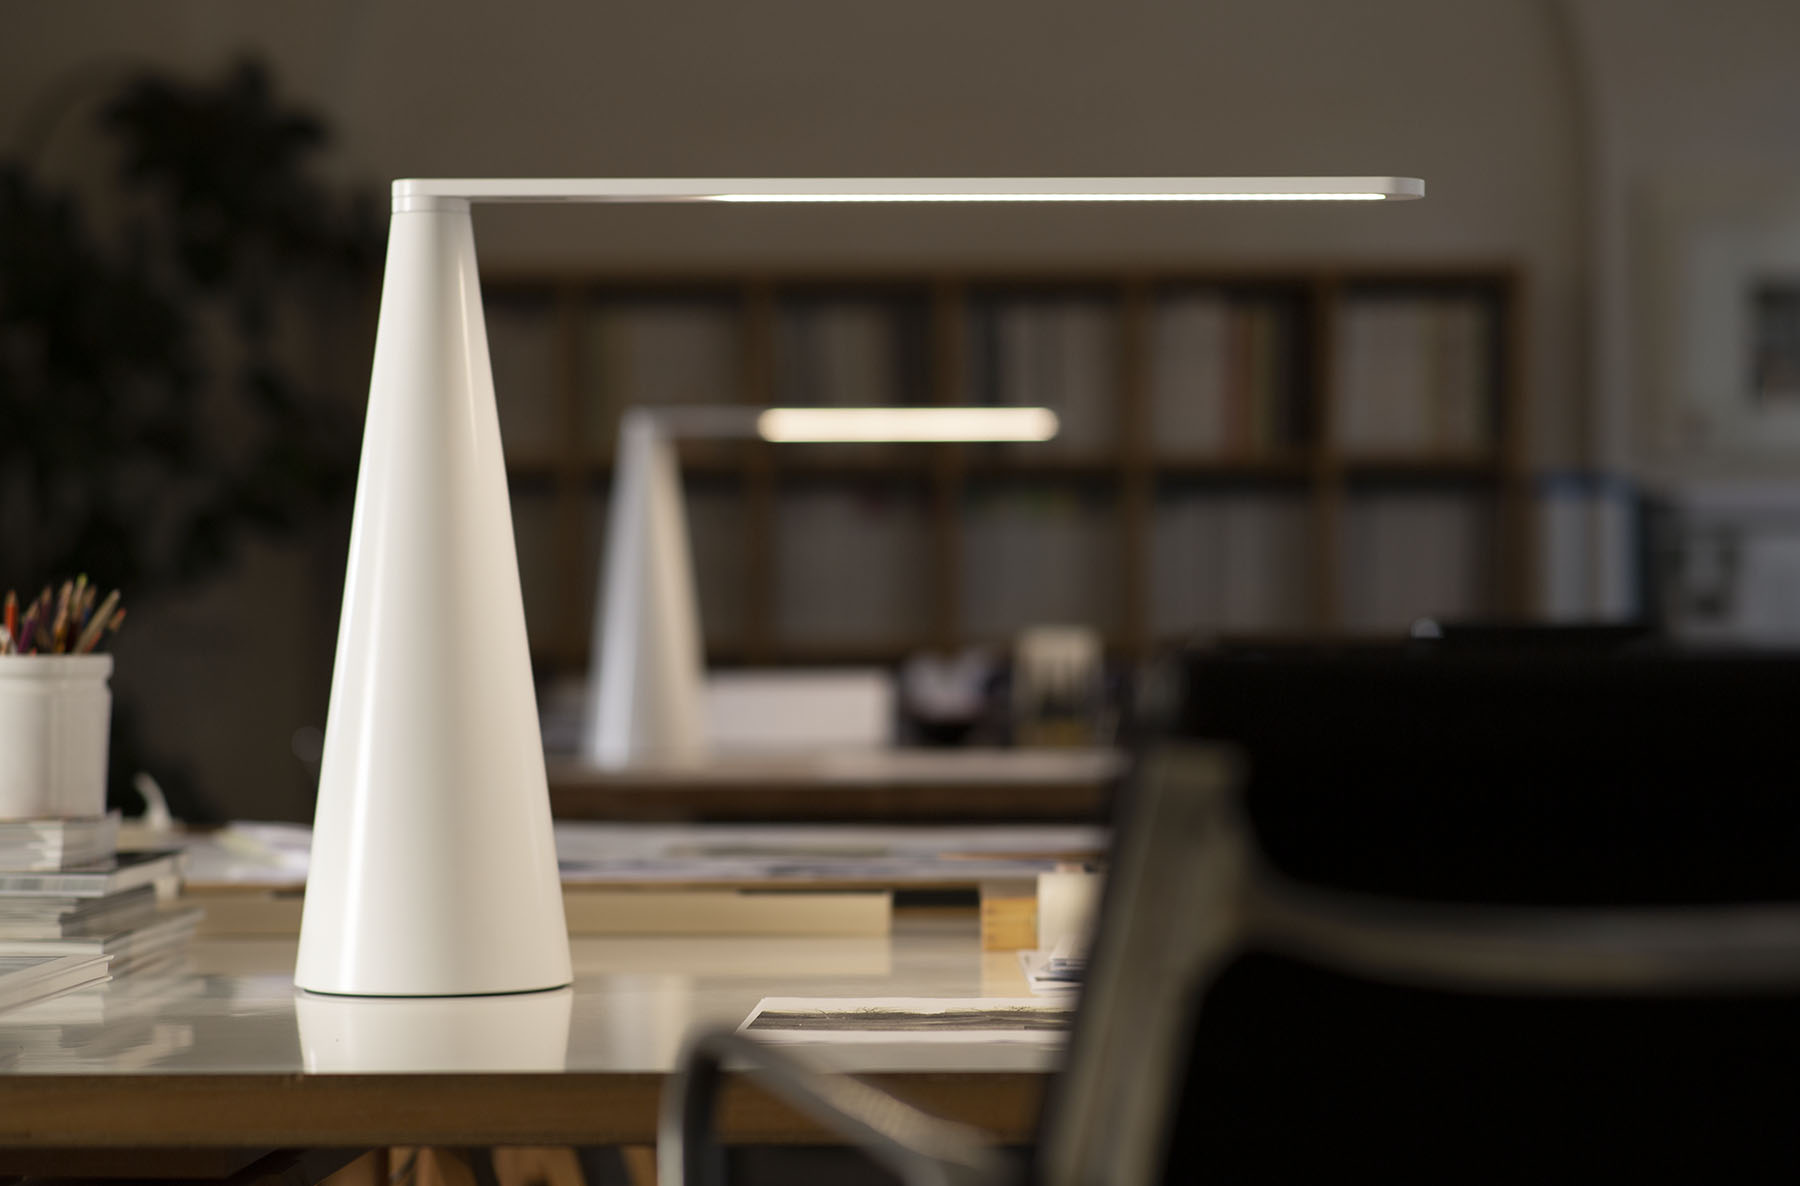 Elica lamp increasingly player of design events